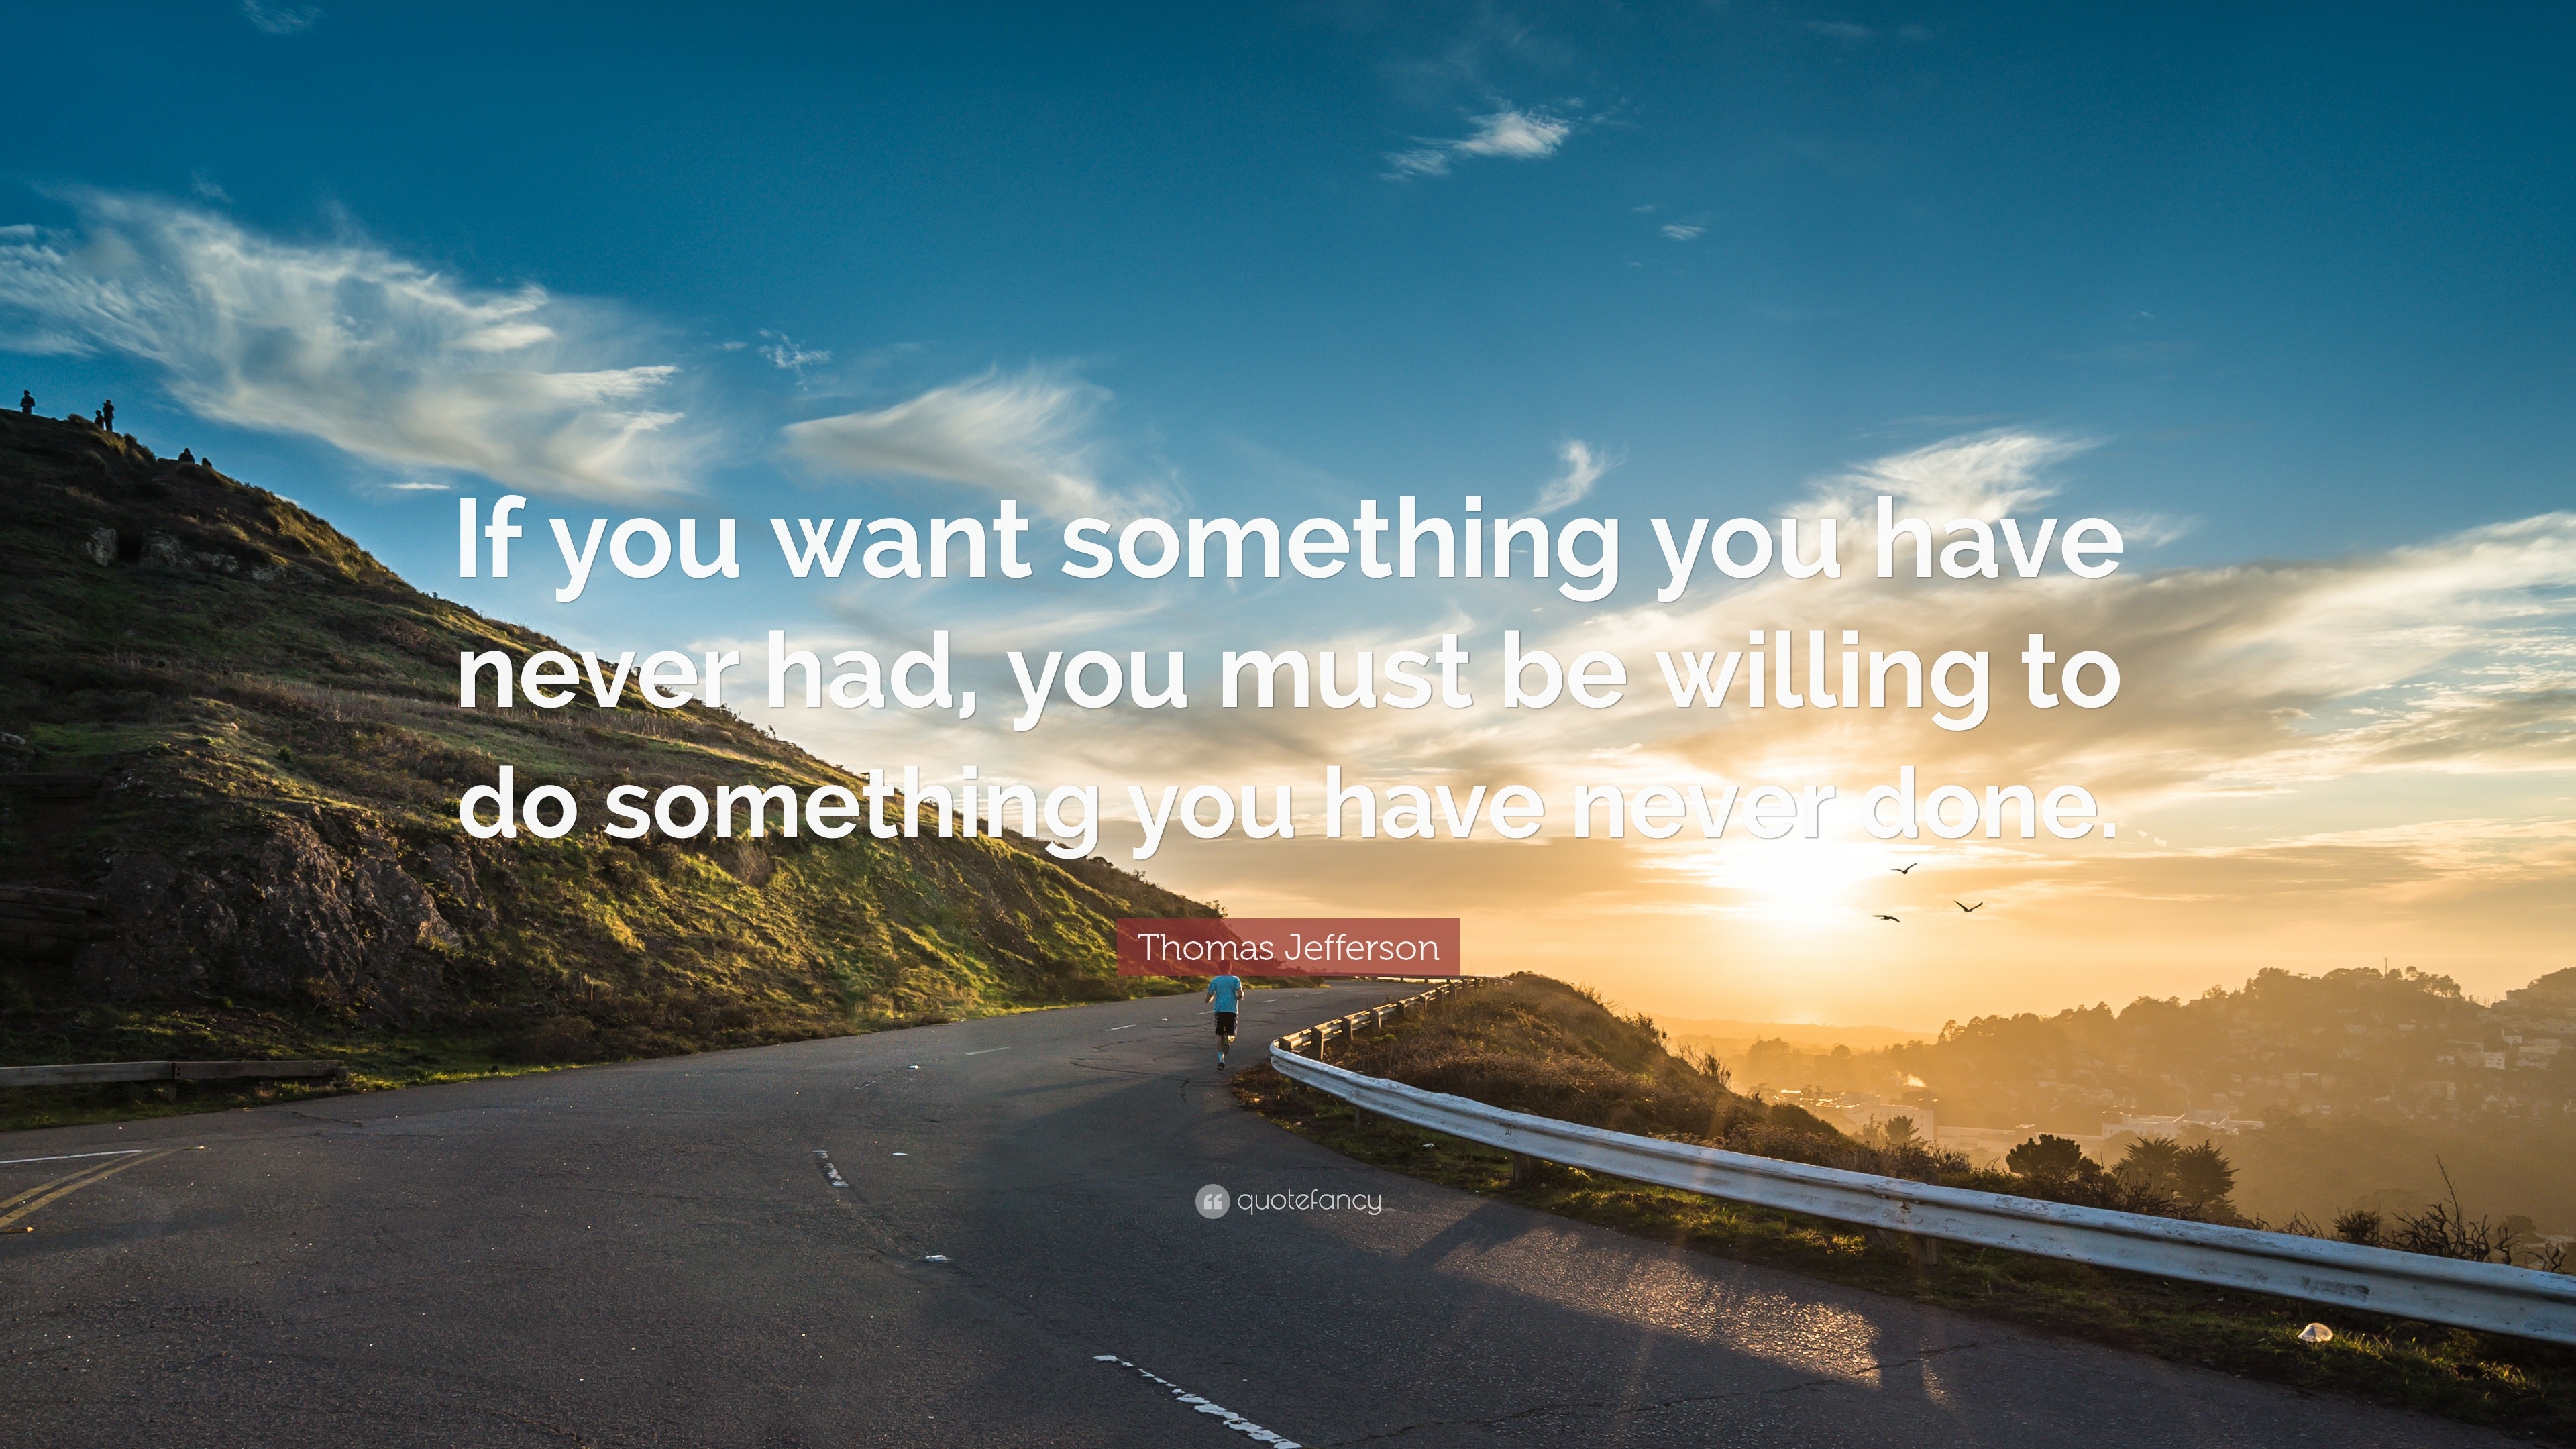 Thomas Jefferson Quote: “If you want something you have never had, you must  be willing to